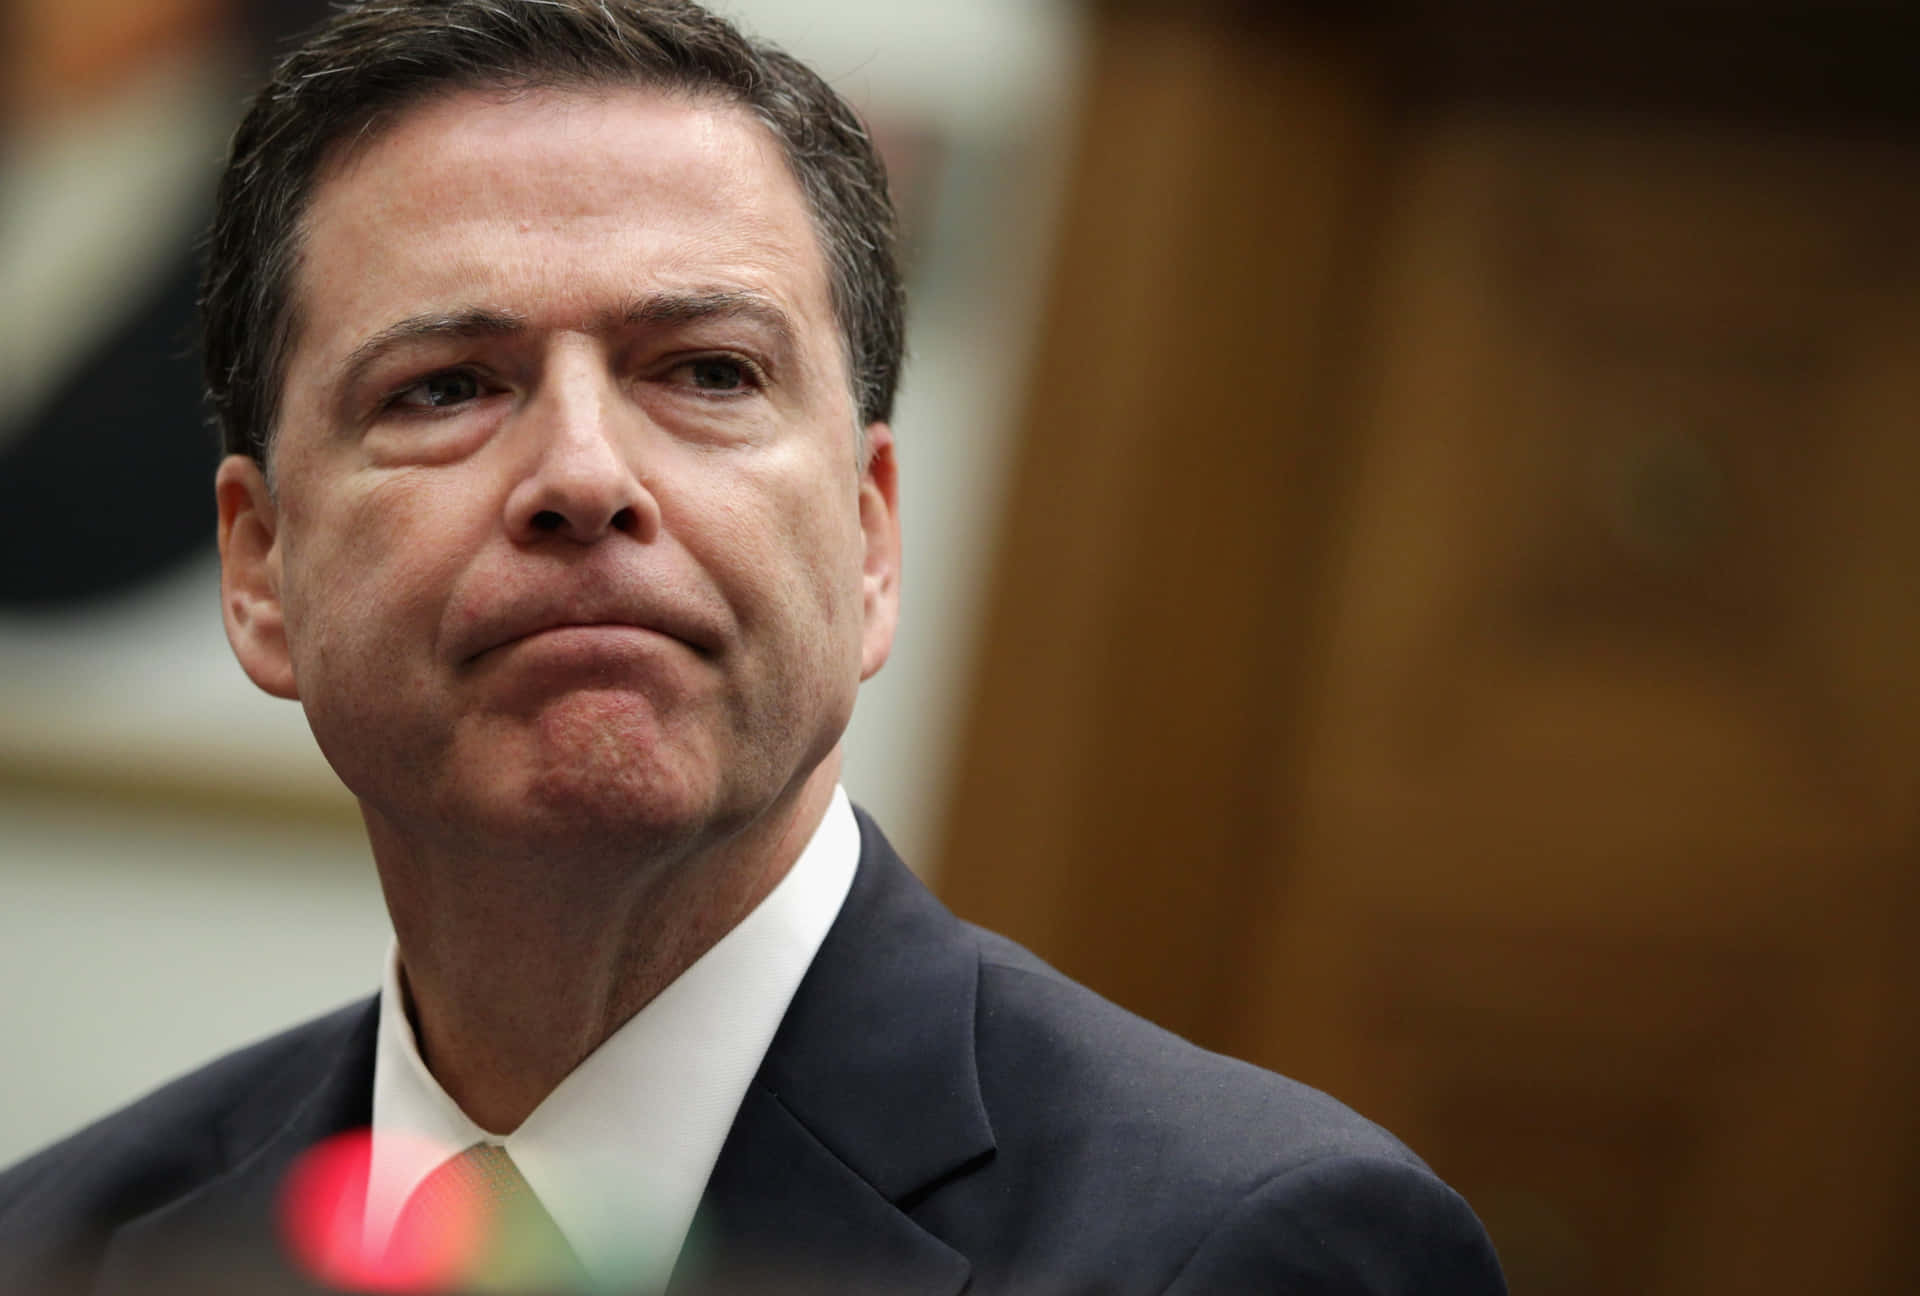 James Comey Serious Expression Wallpaper